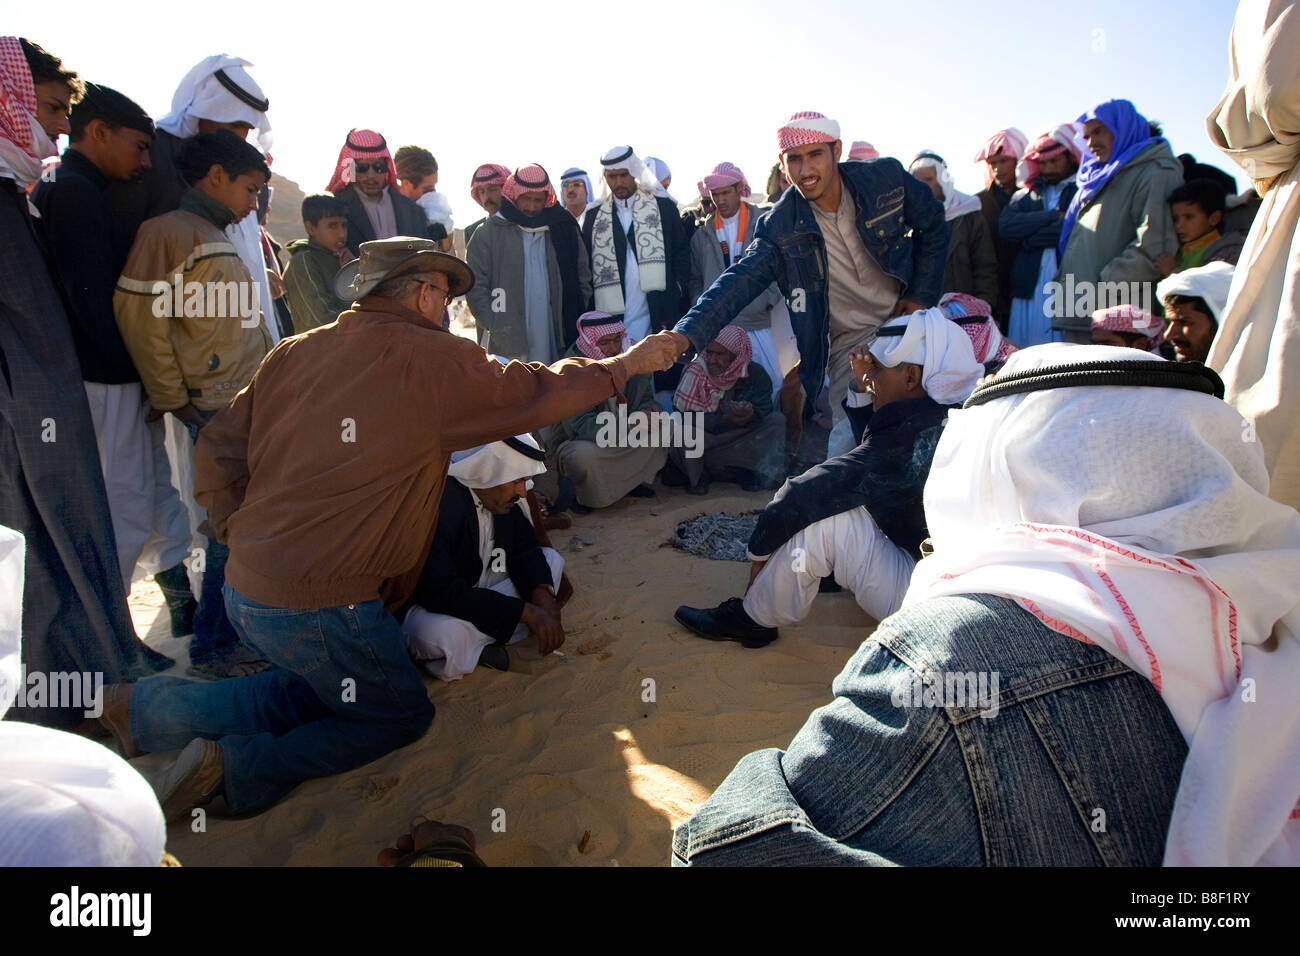 Two bedouin officials shake hands on agreement to the rules and regulations of the annual camel race in Egypt Stock Photo